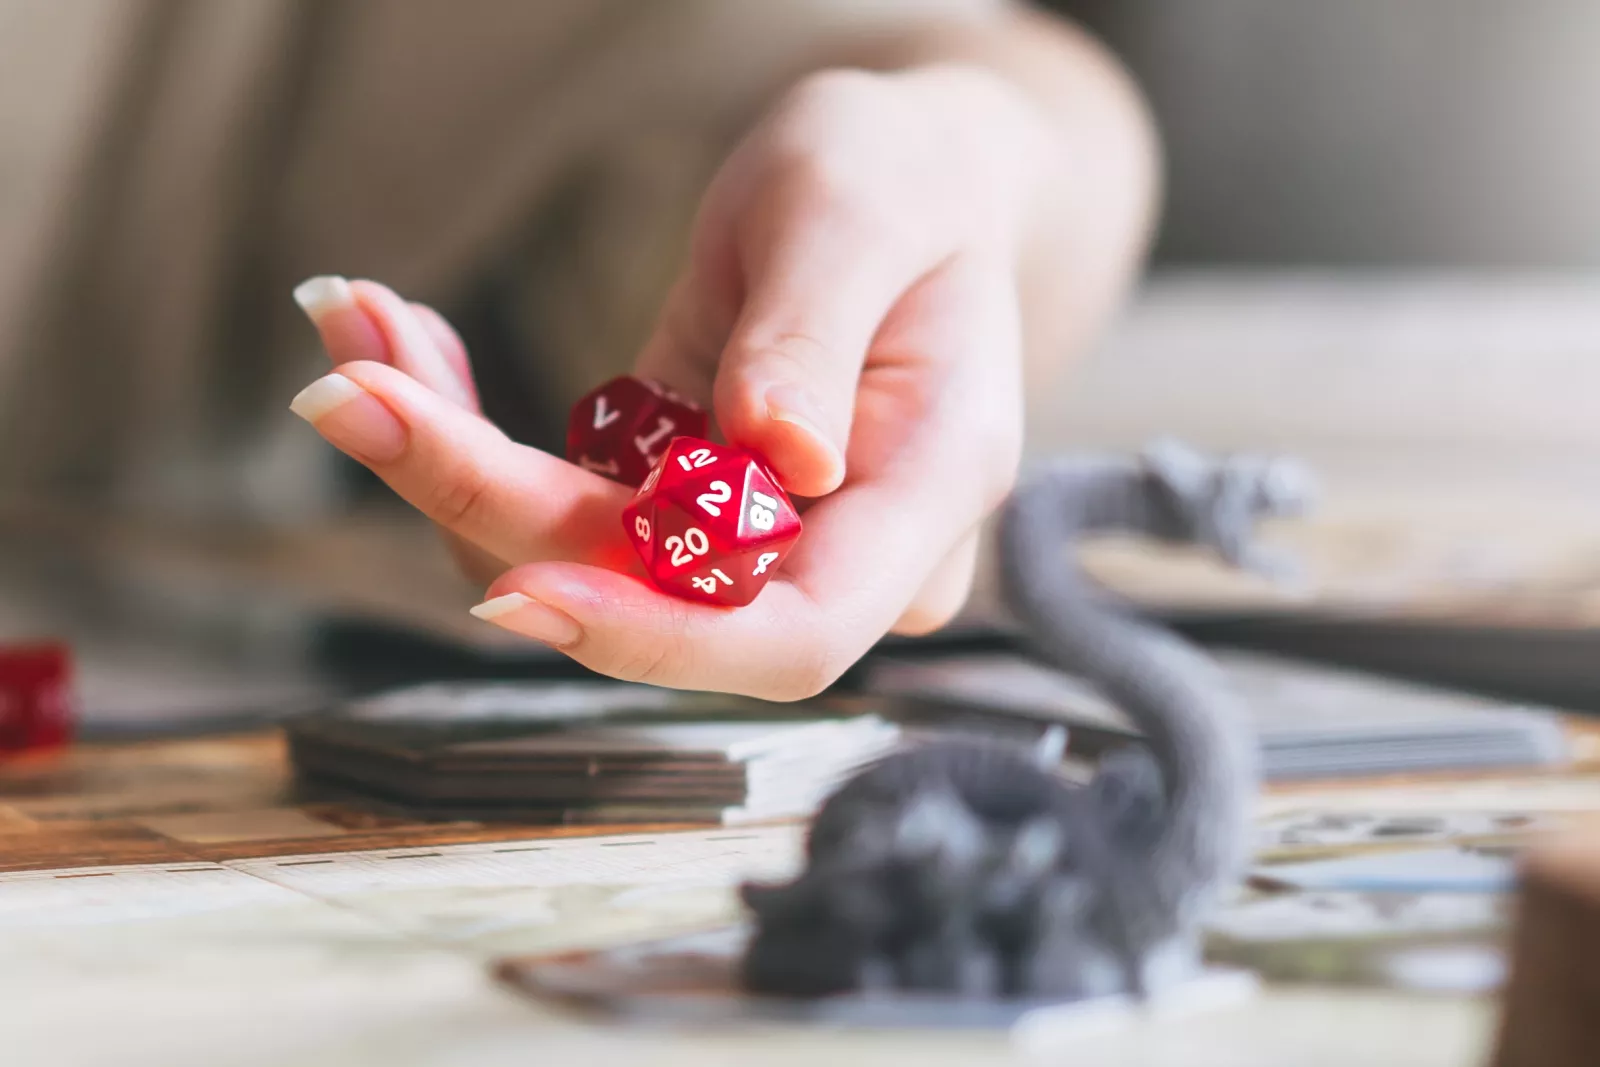 Image of a person playing D&D